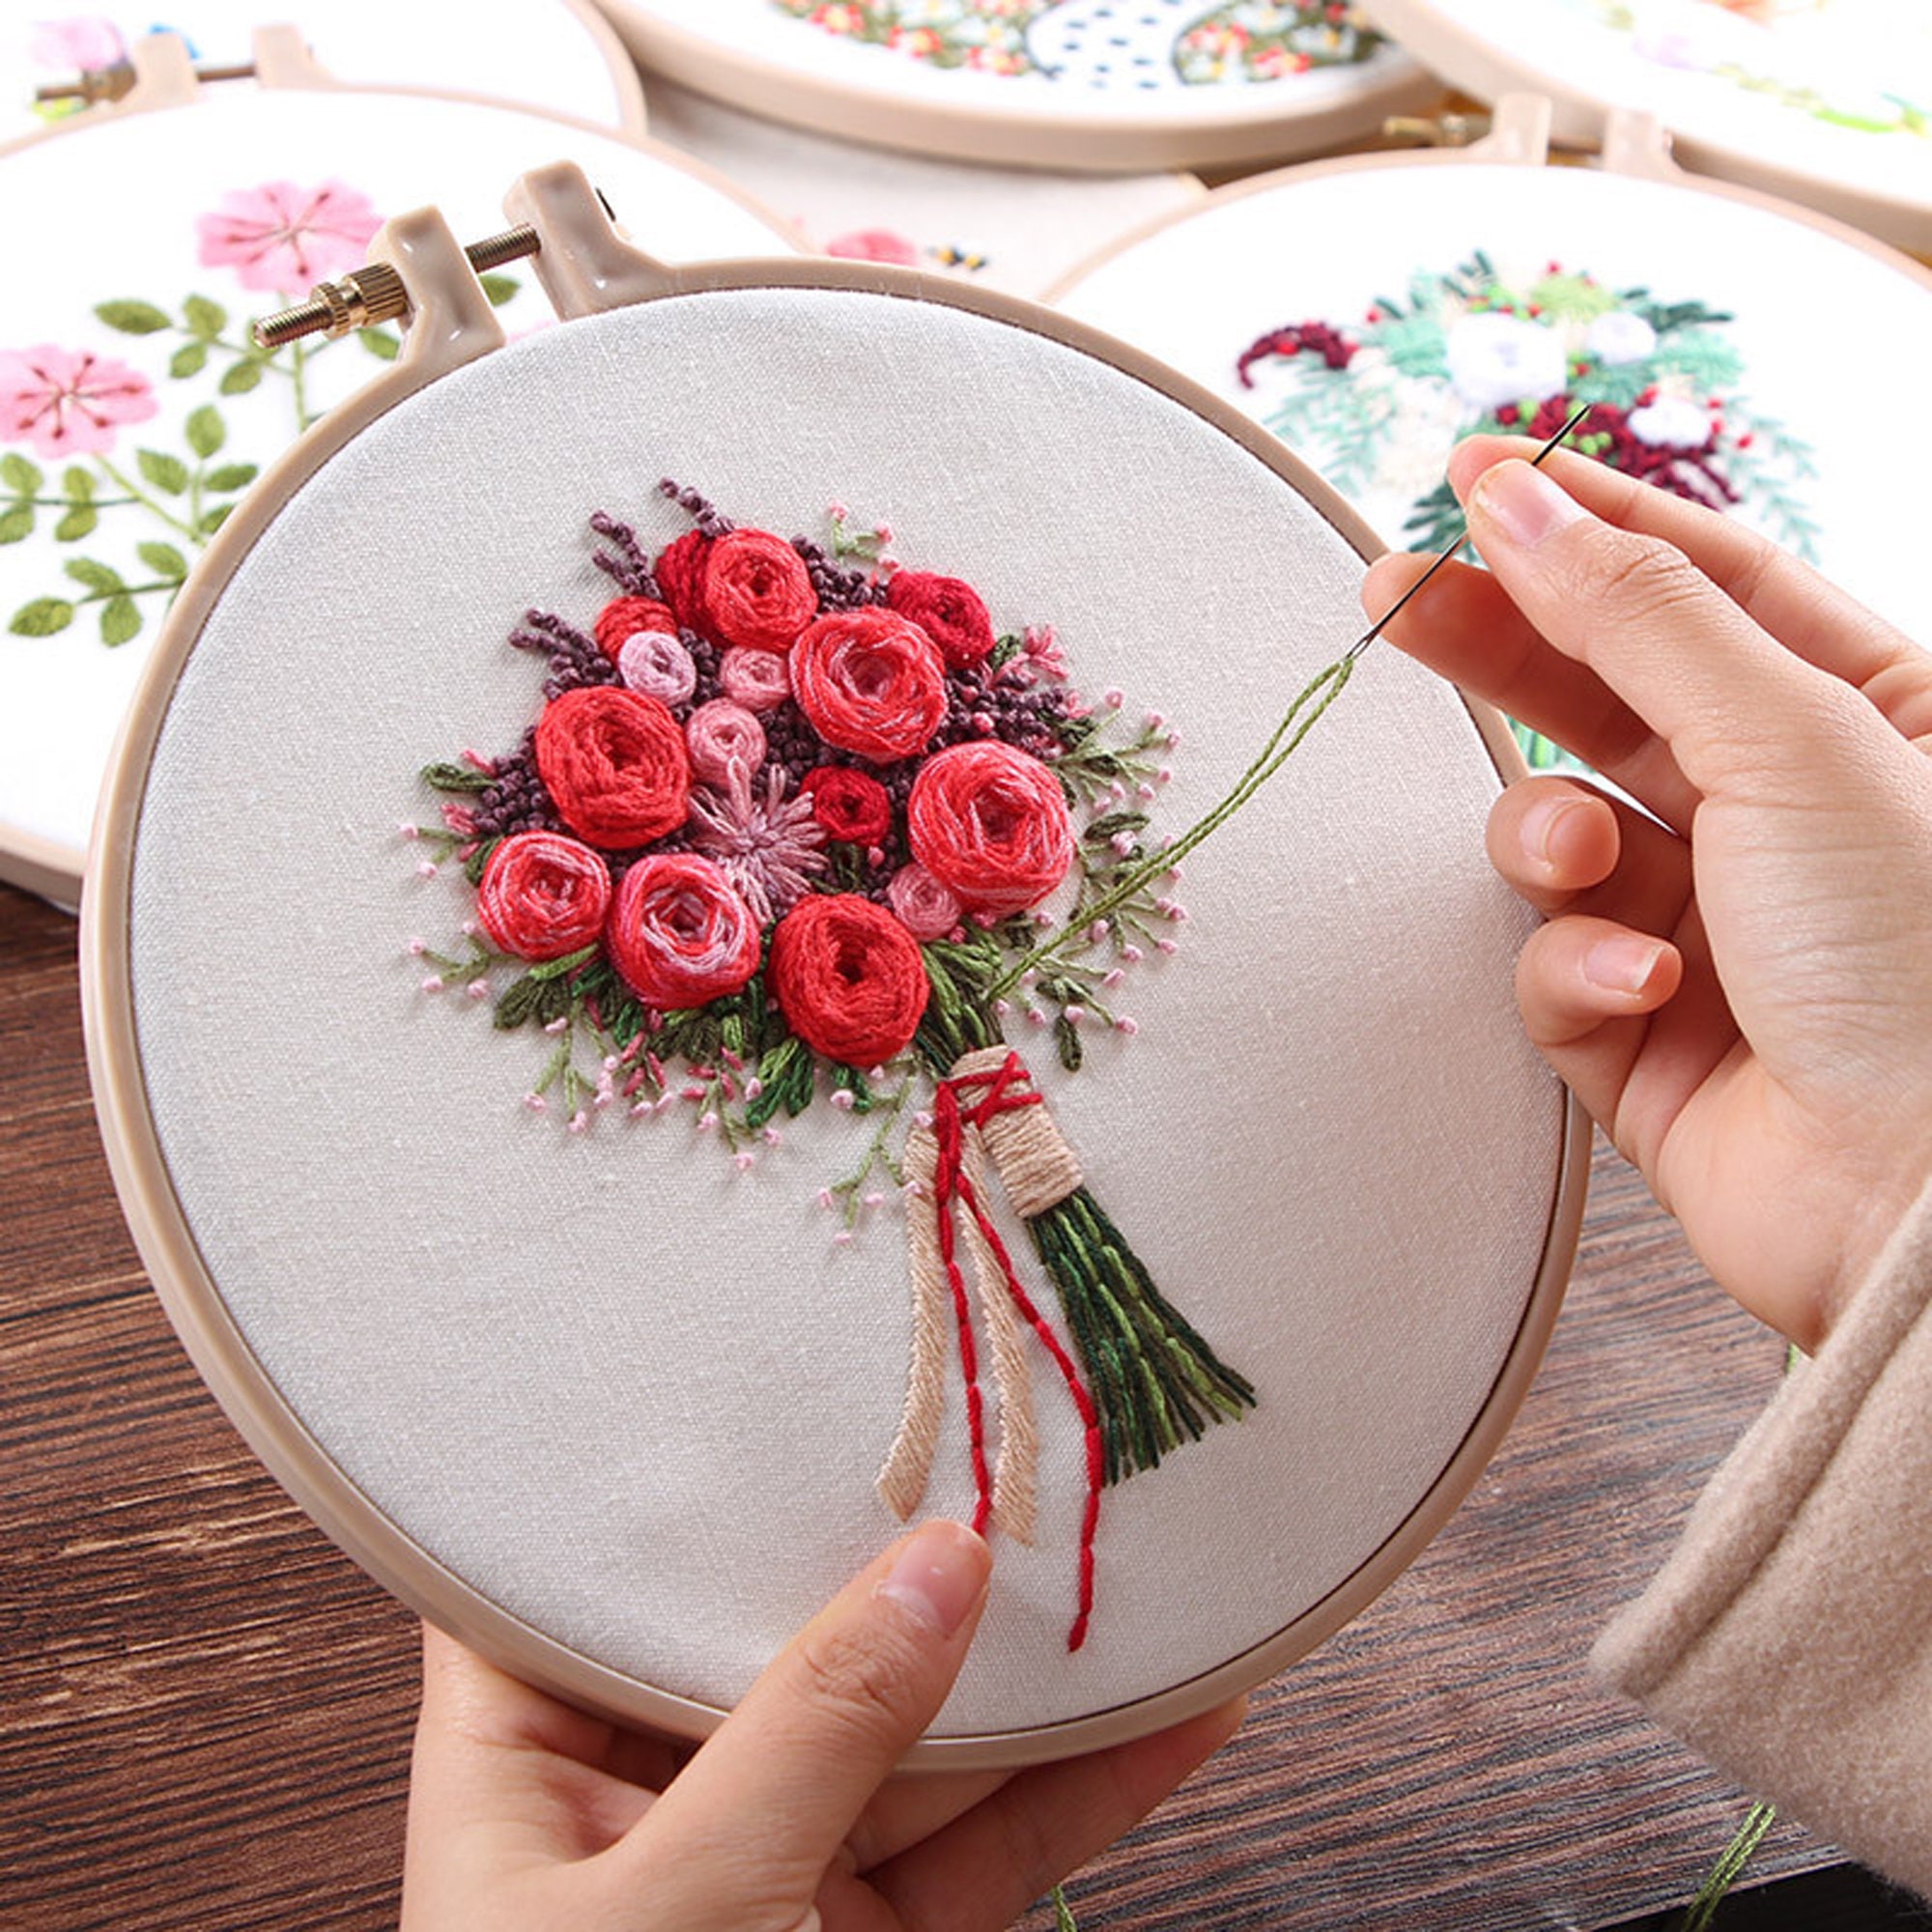 Funny Embroidery Kit for Beginners Adults Kit with Stamped Floral